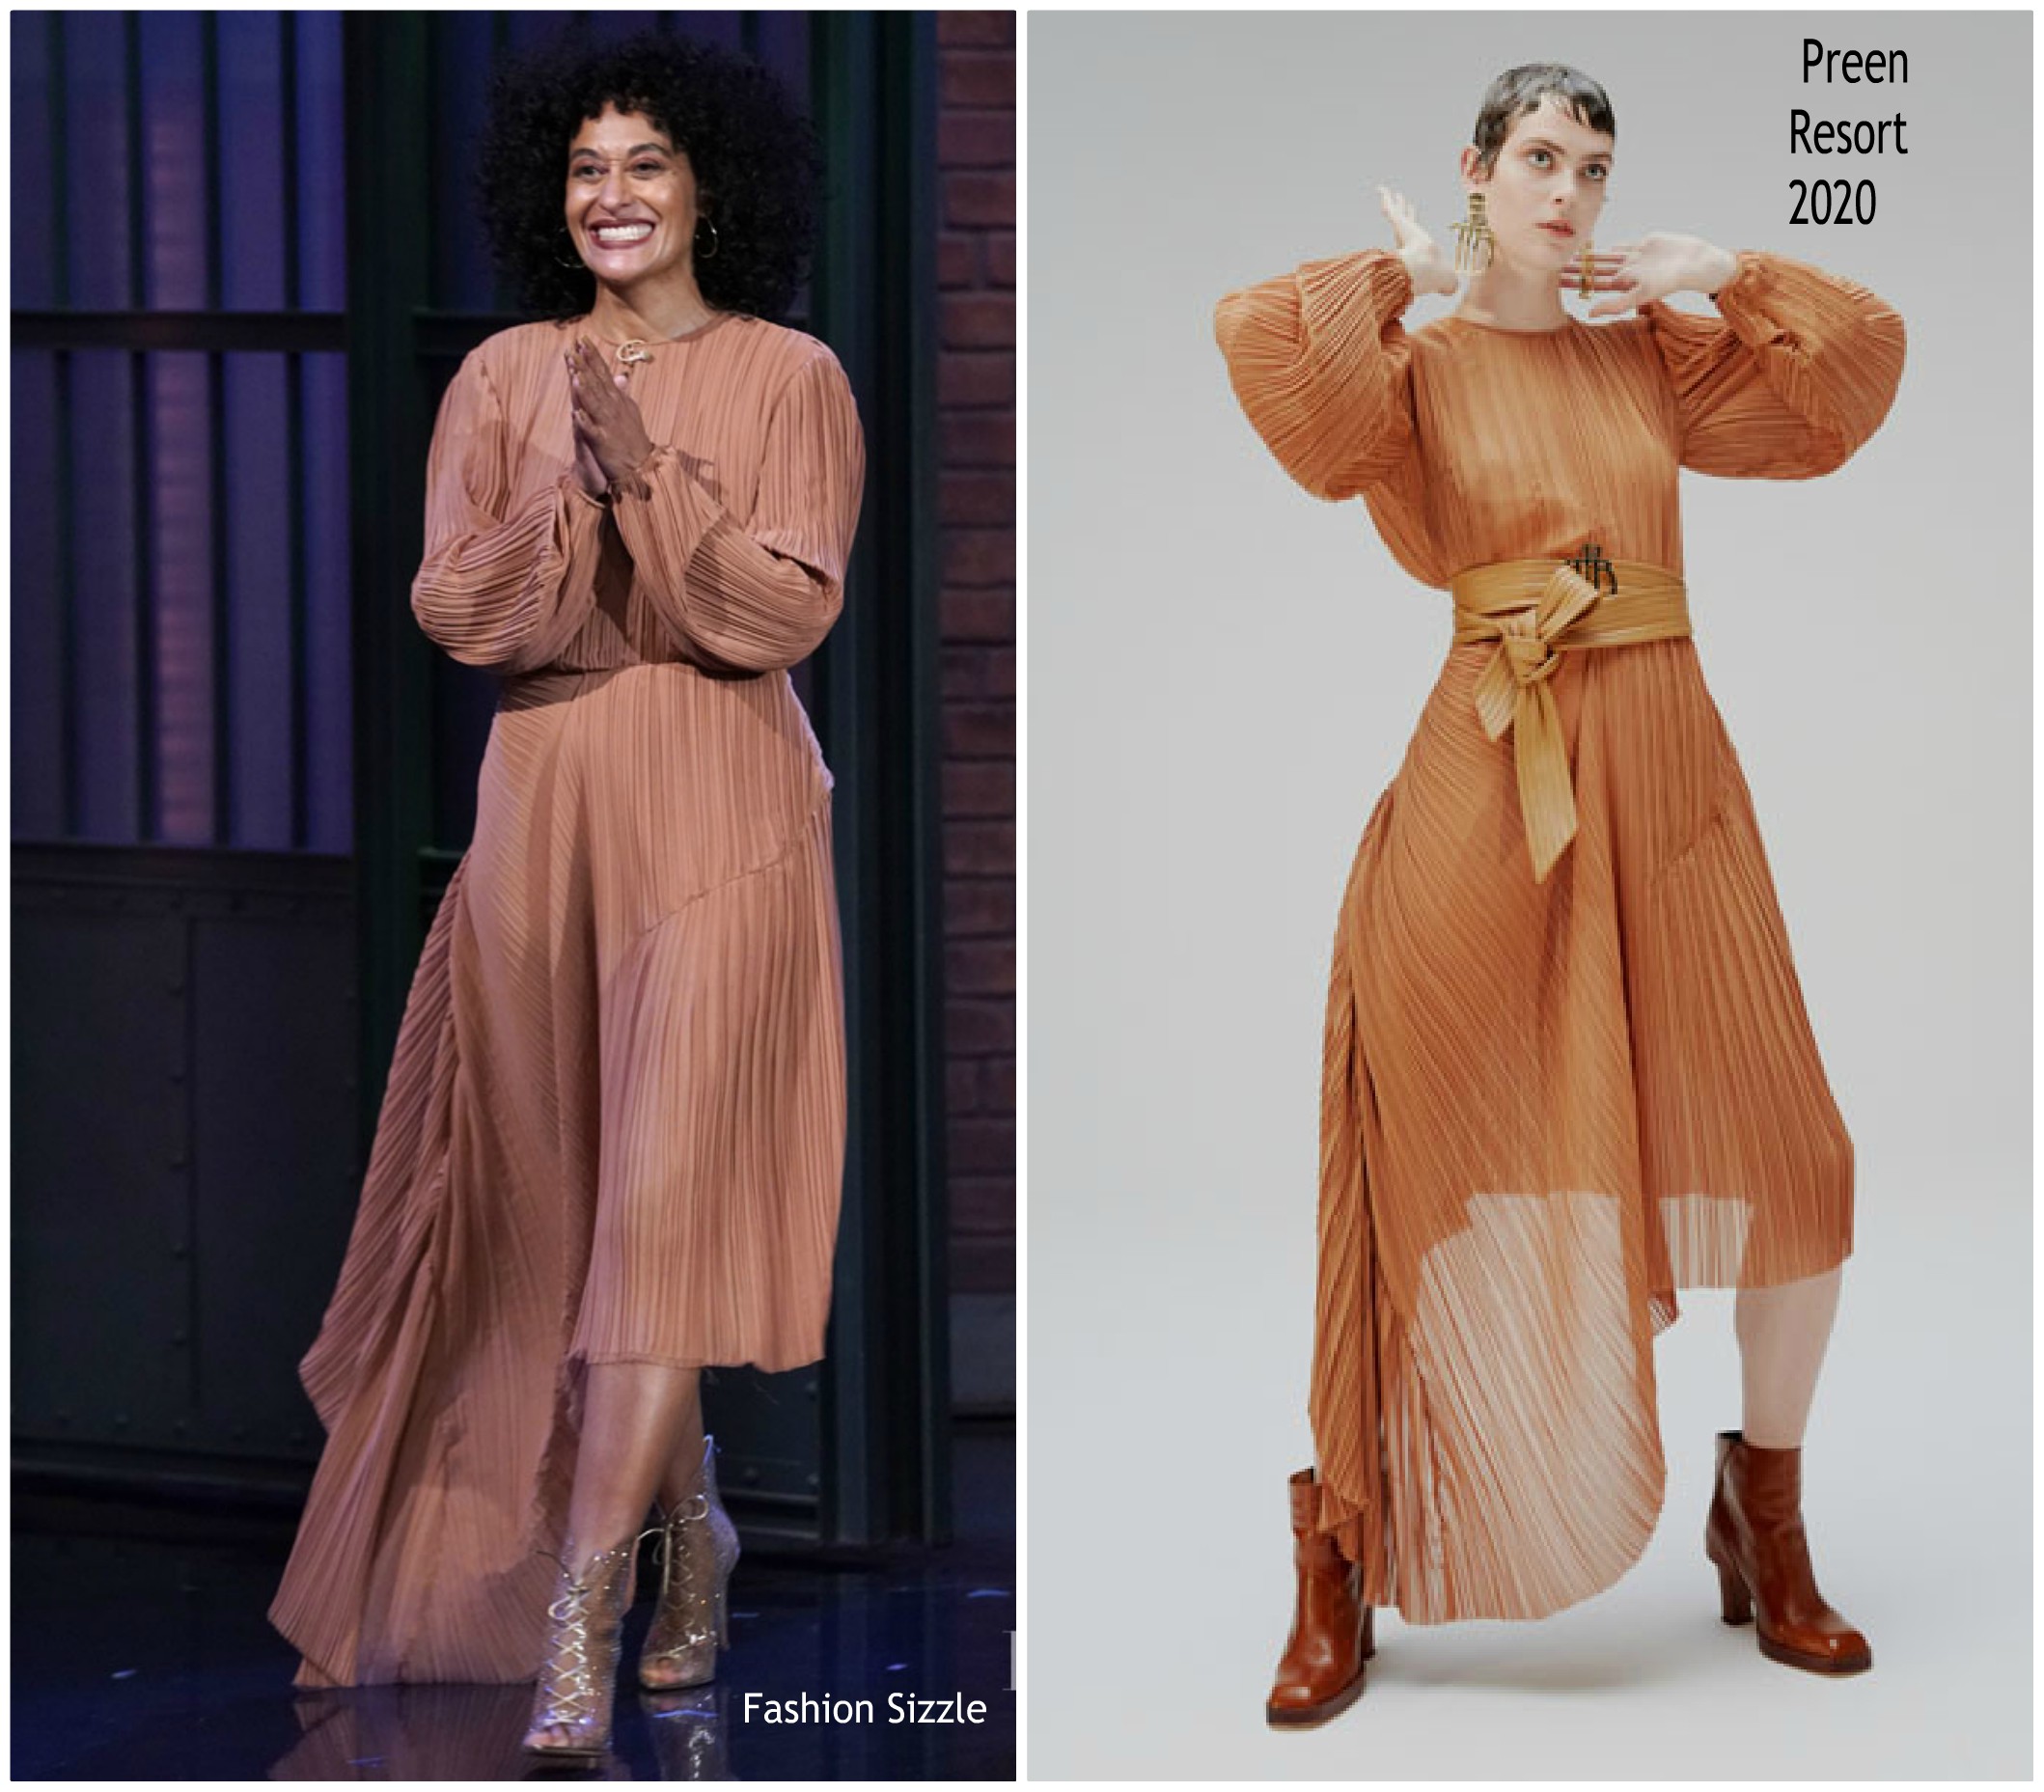 Tracee Ellis Ross’  In Preen Dress @ Late Night with Seth Meyers